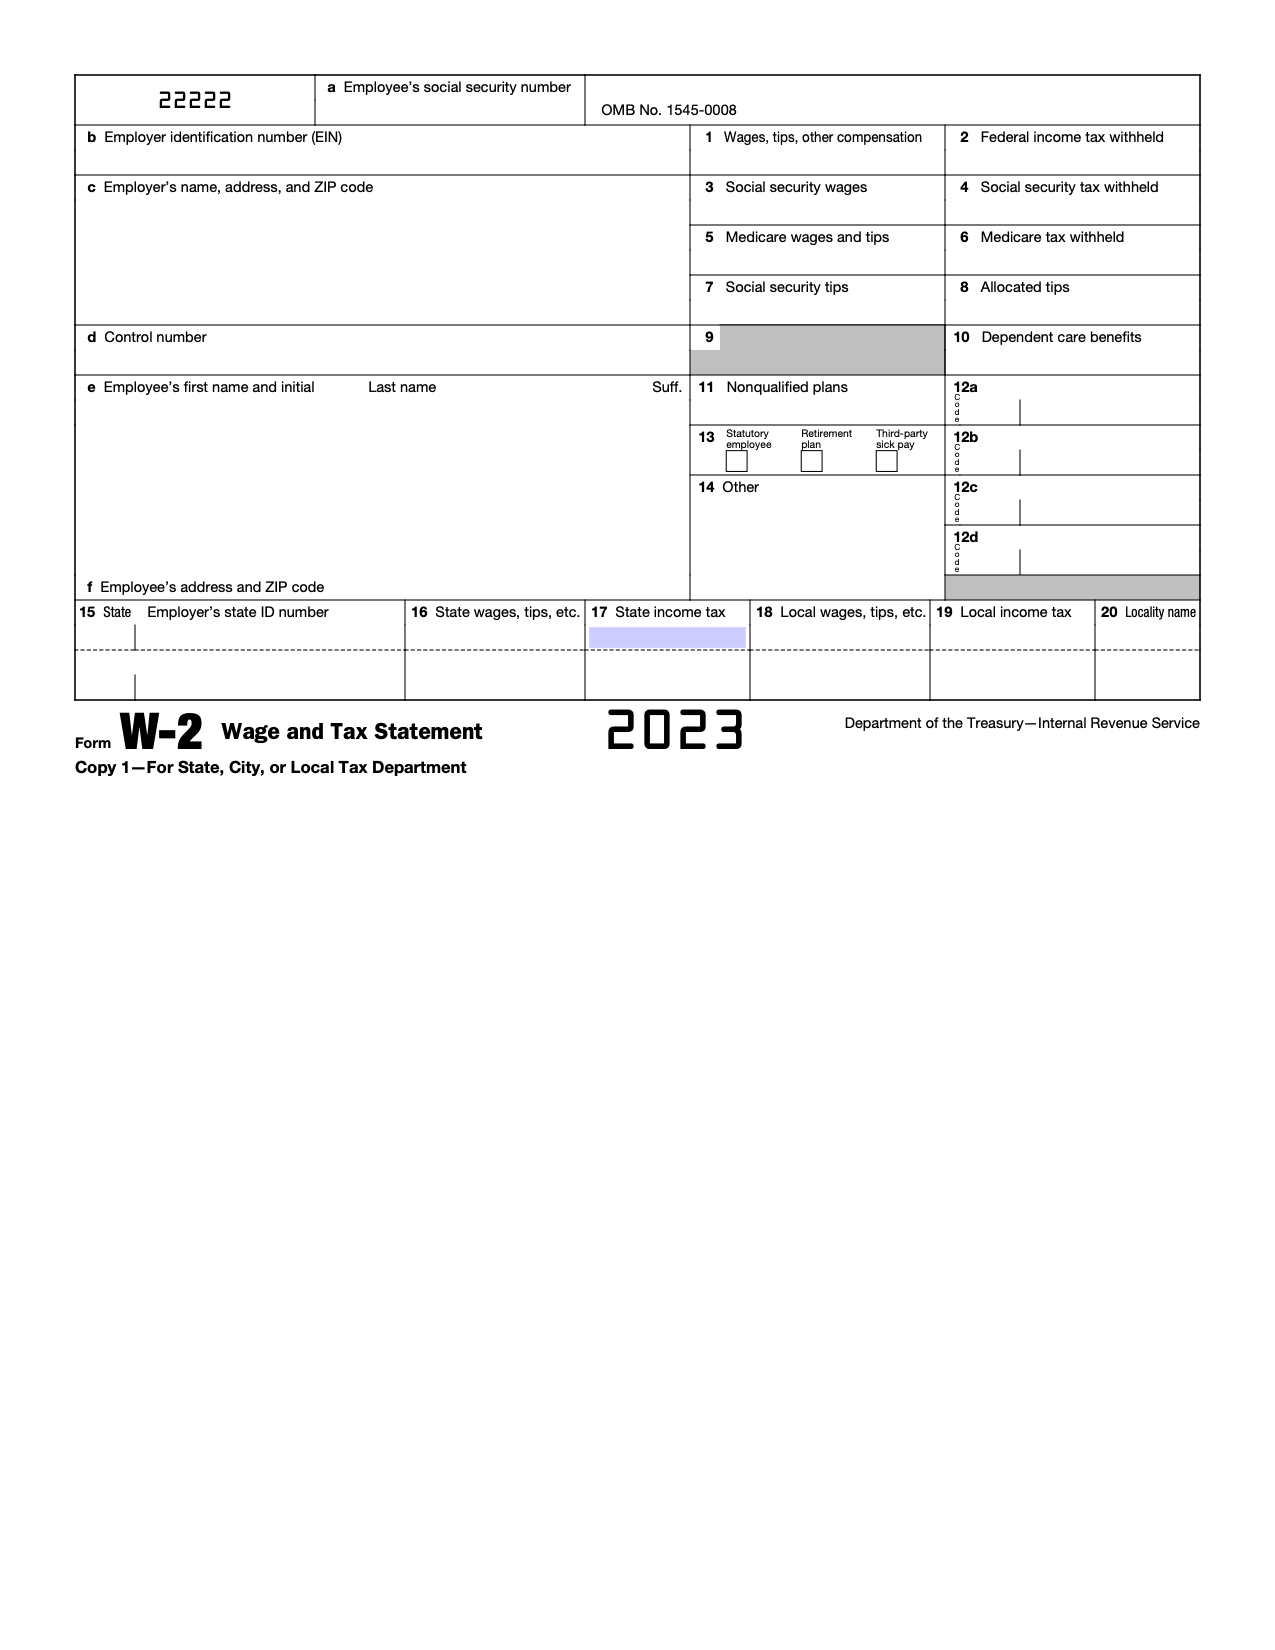 Free Irs Form W-2 | Wage And Tax Statement - Pdf – Eforms pertaining to W2 Tax Form Online